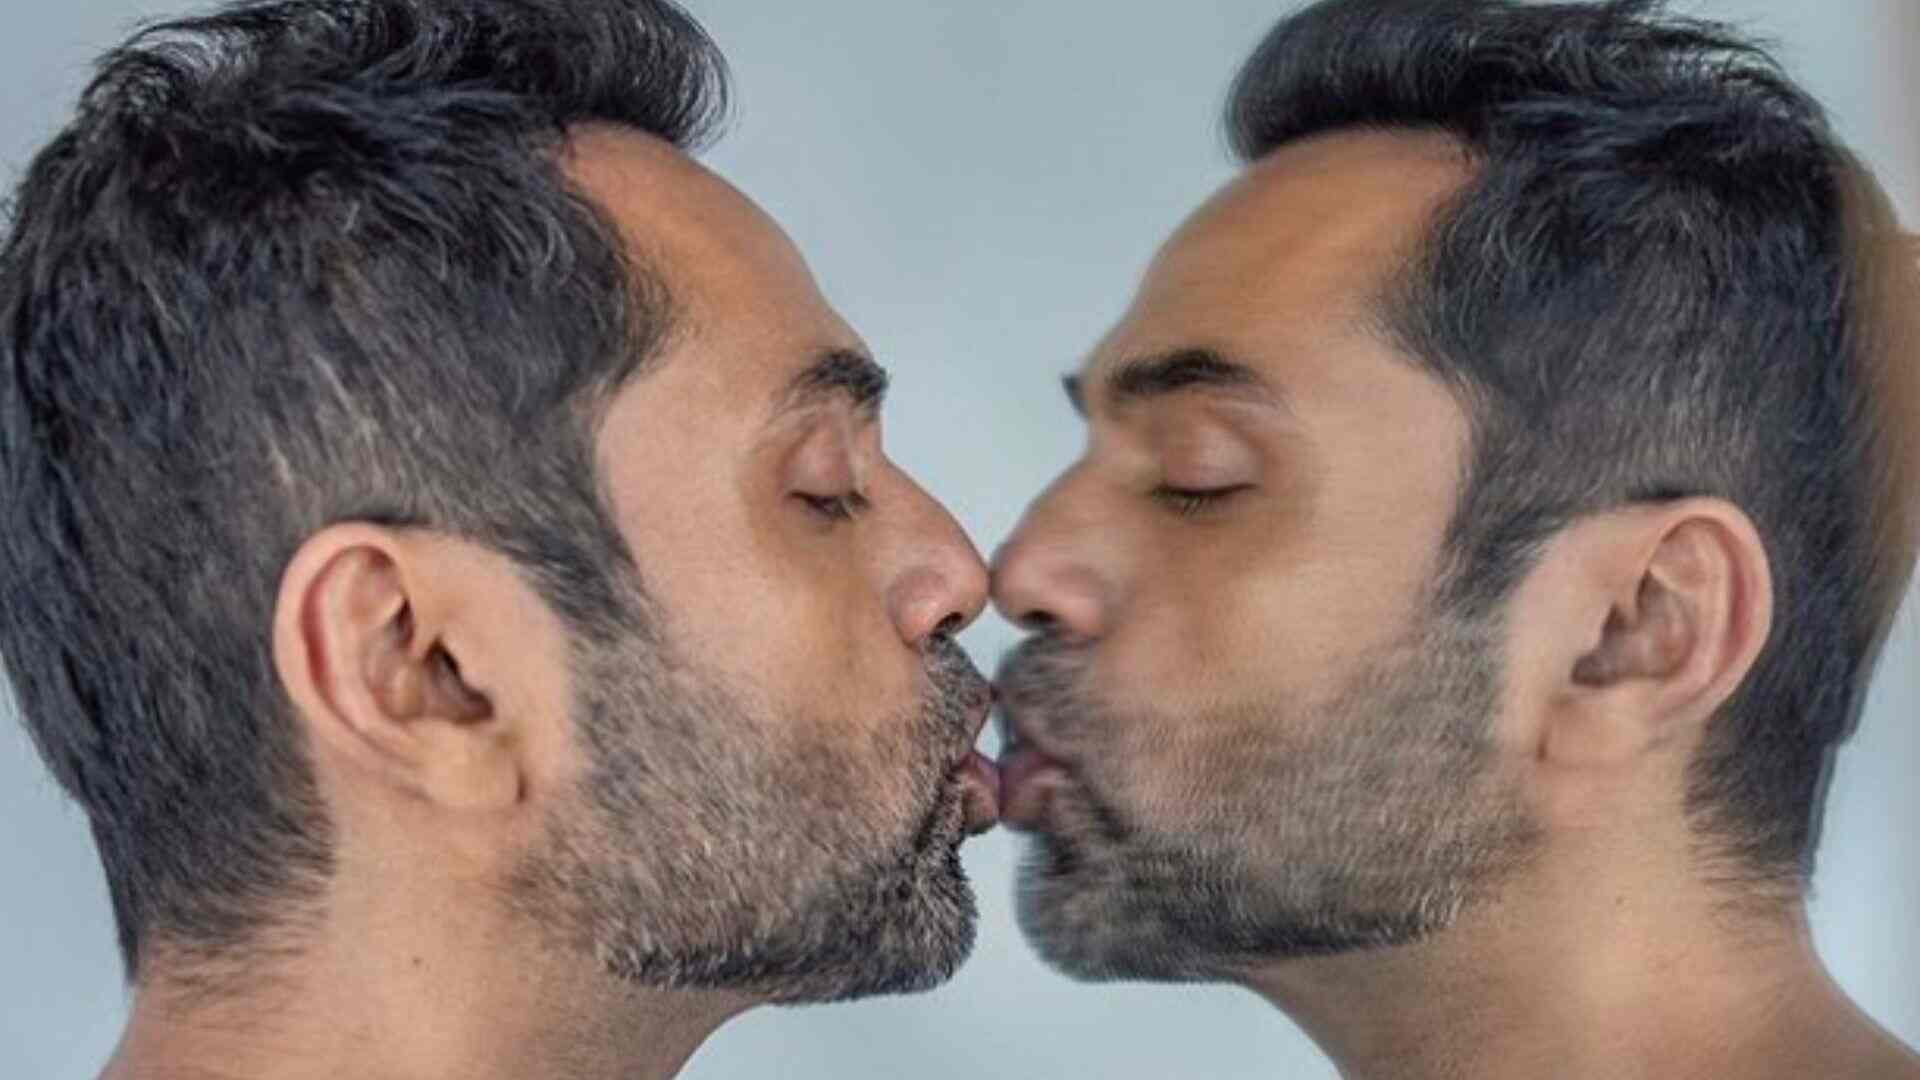 Abhay Deol Speaks Out On Sexuality: I Don’t Need To Label Myself